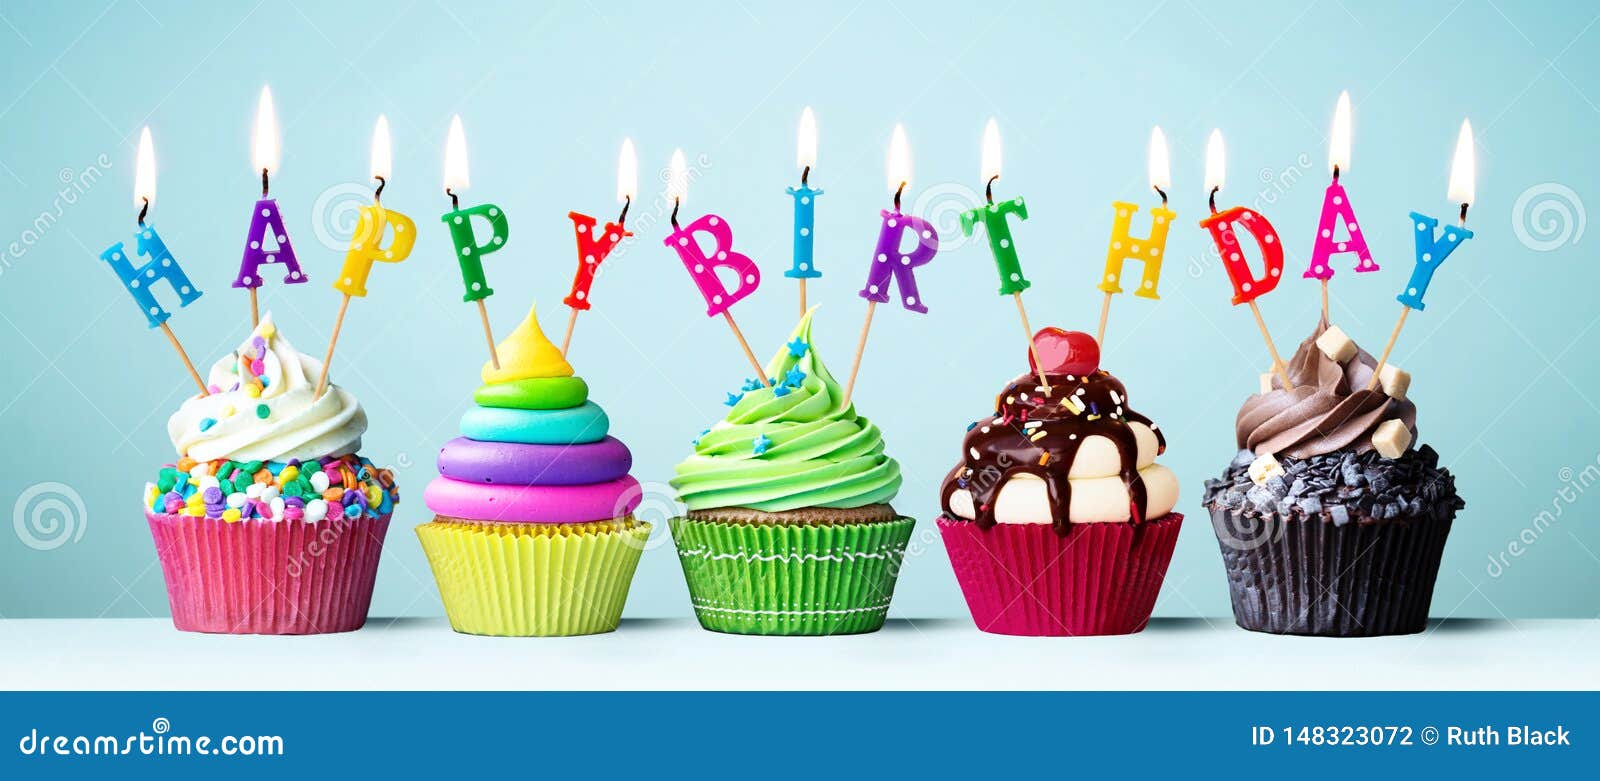 Colorful Happy Birthday Cupcakes Stock Photo - Image of blue ...